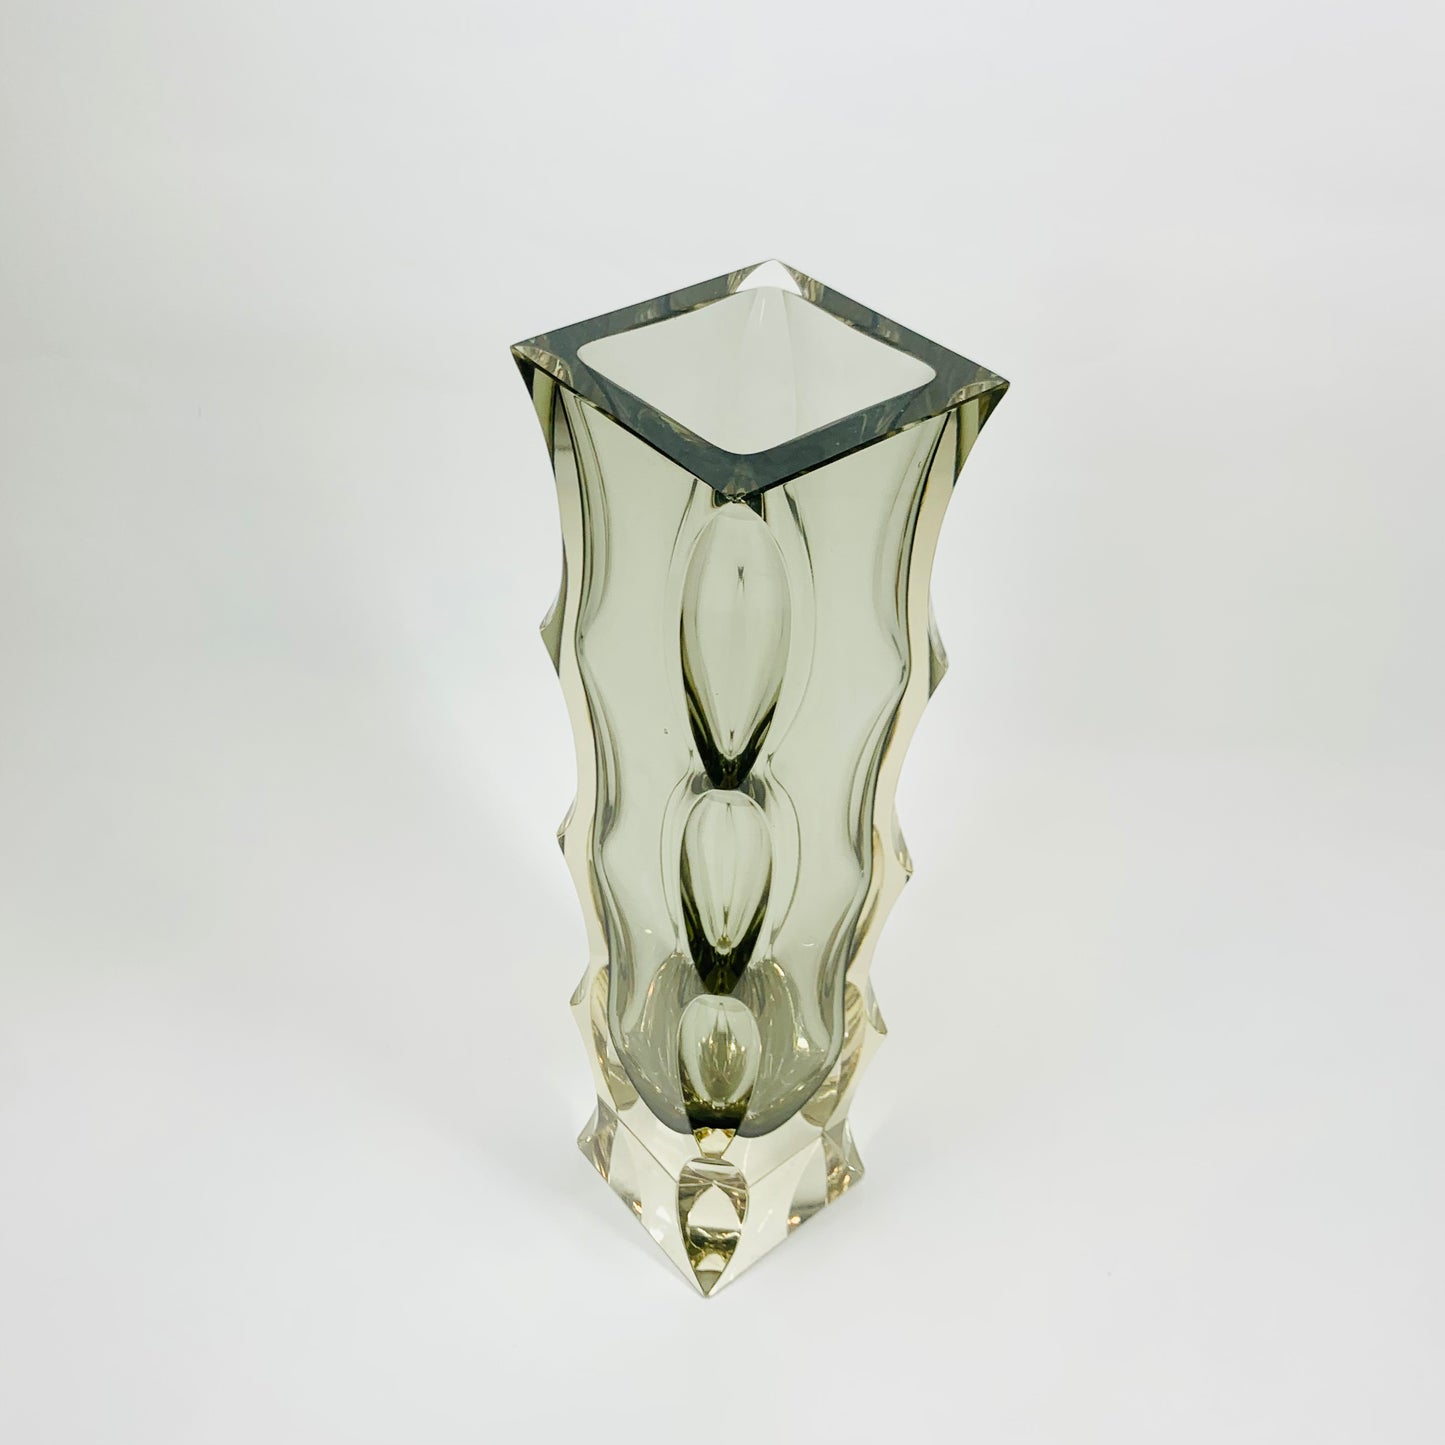 Extremely rare large MCM grey Murano faceted sommerso glass vase by Mandruzzato